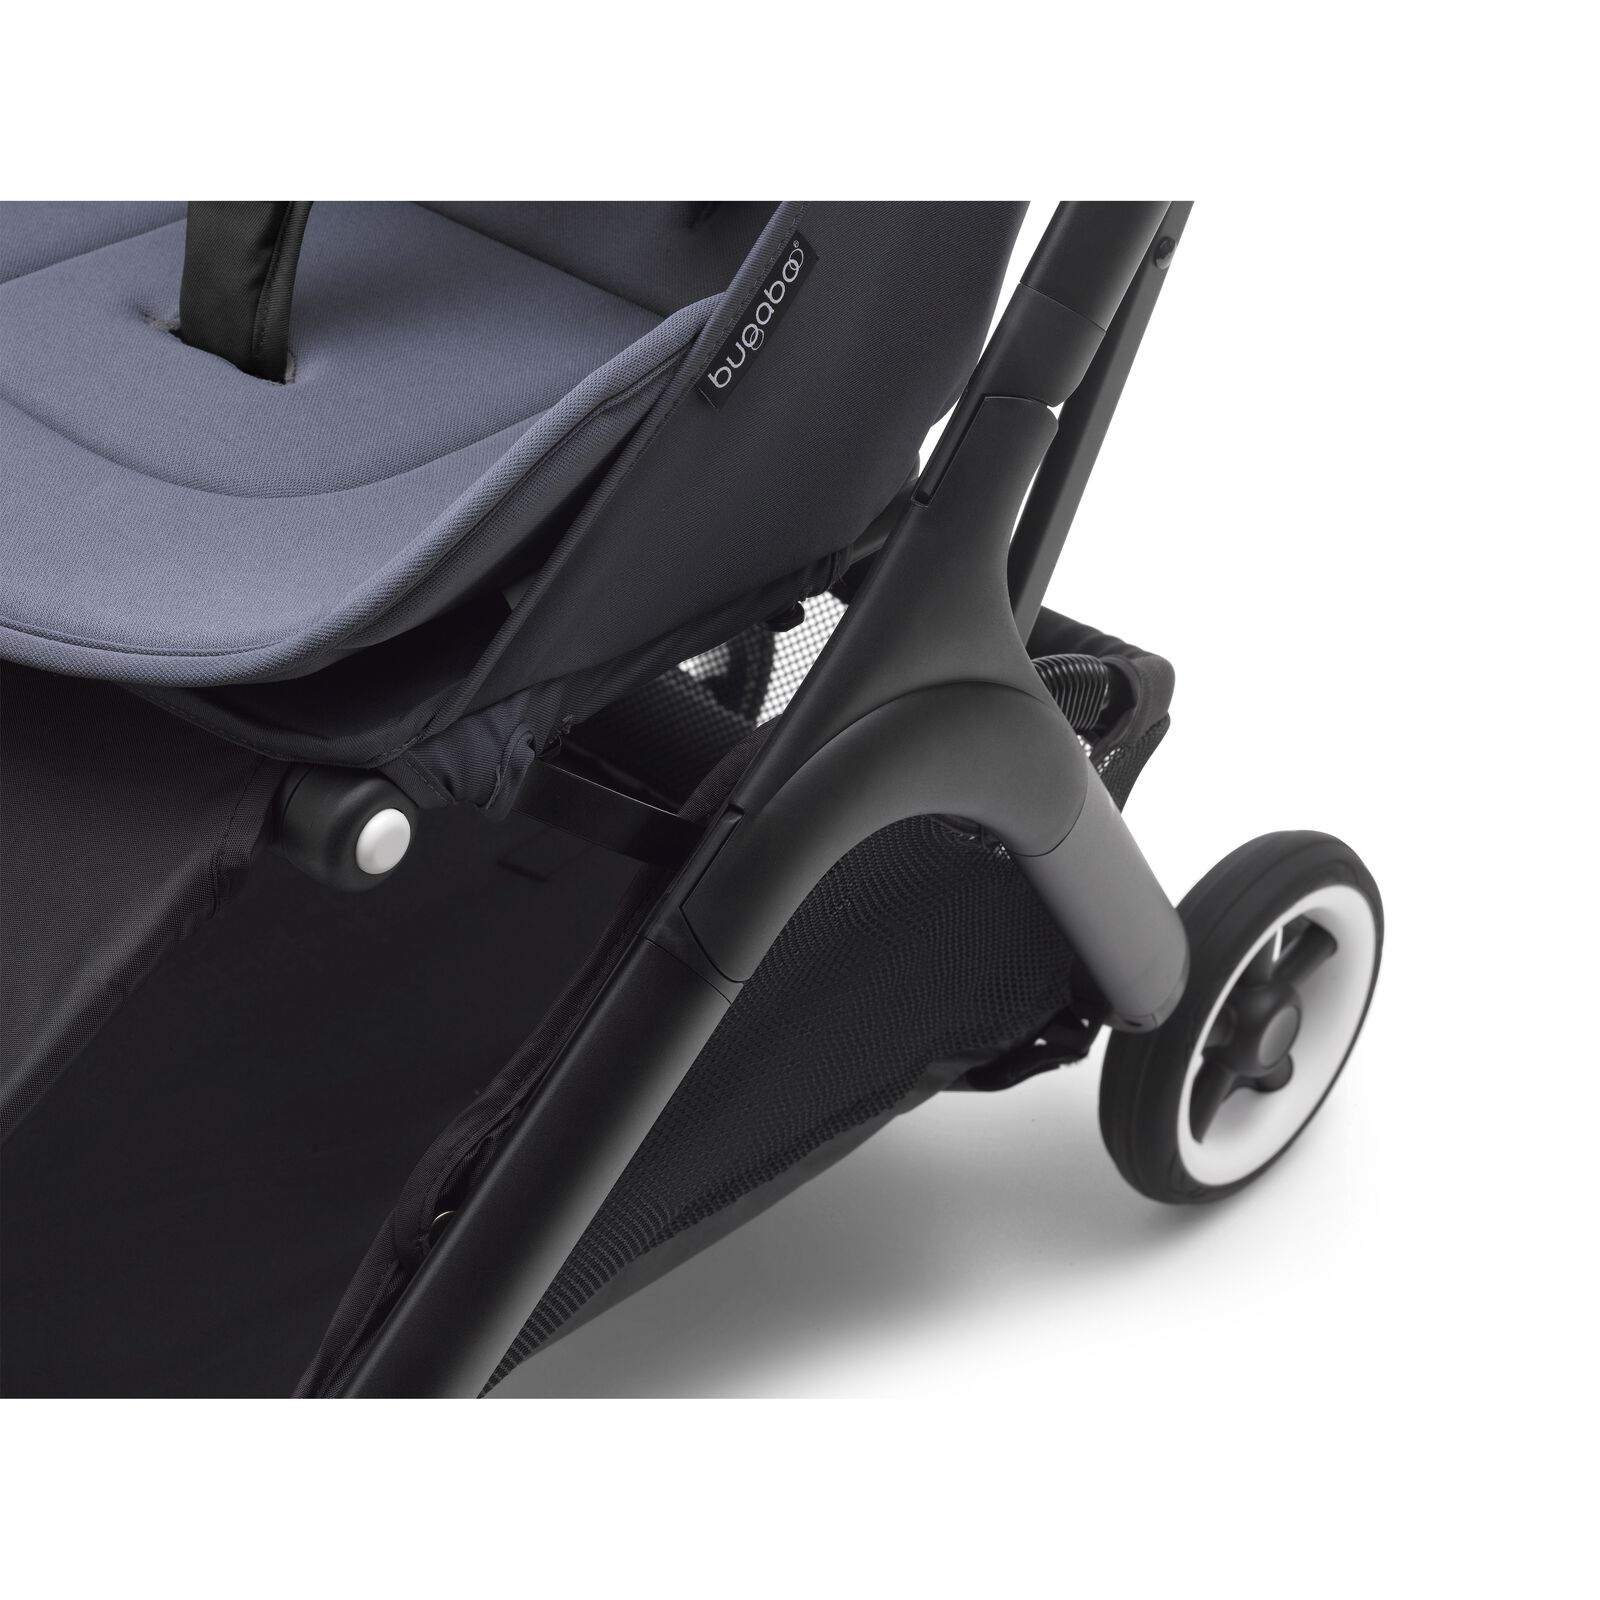 Bugaboo Butterfly seat pram - View 11